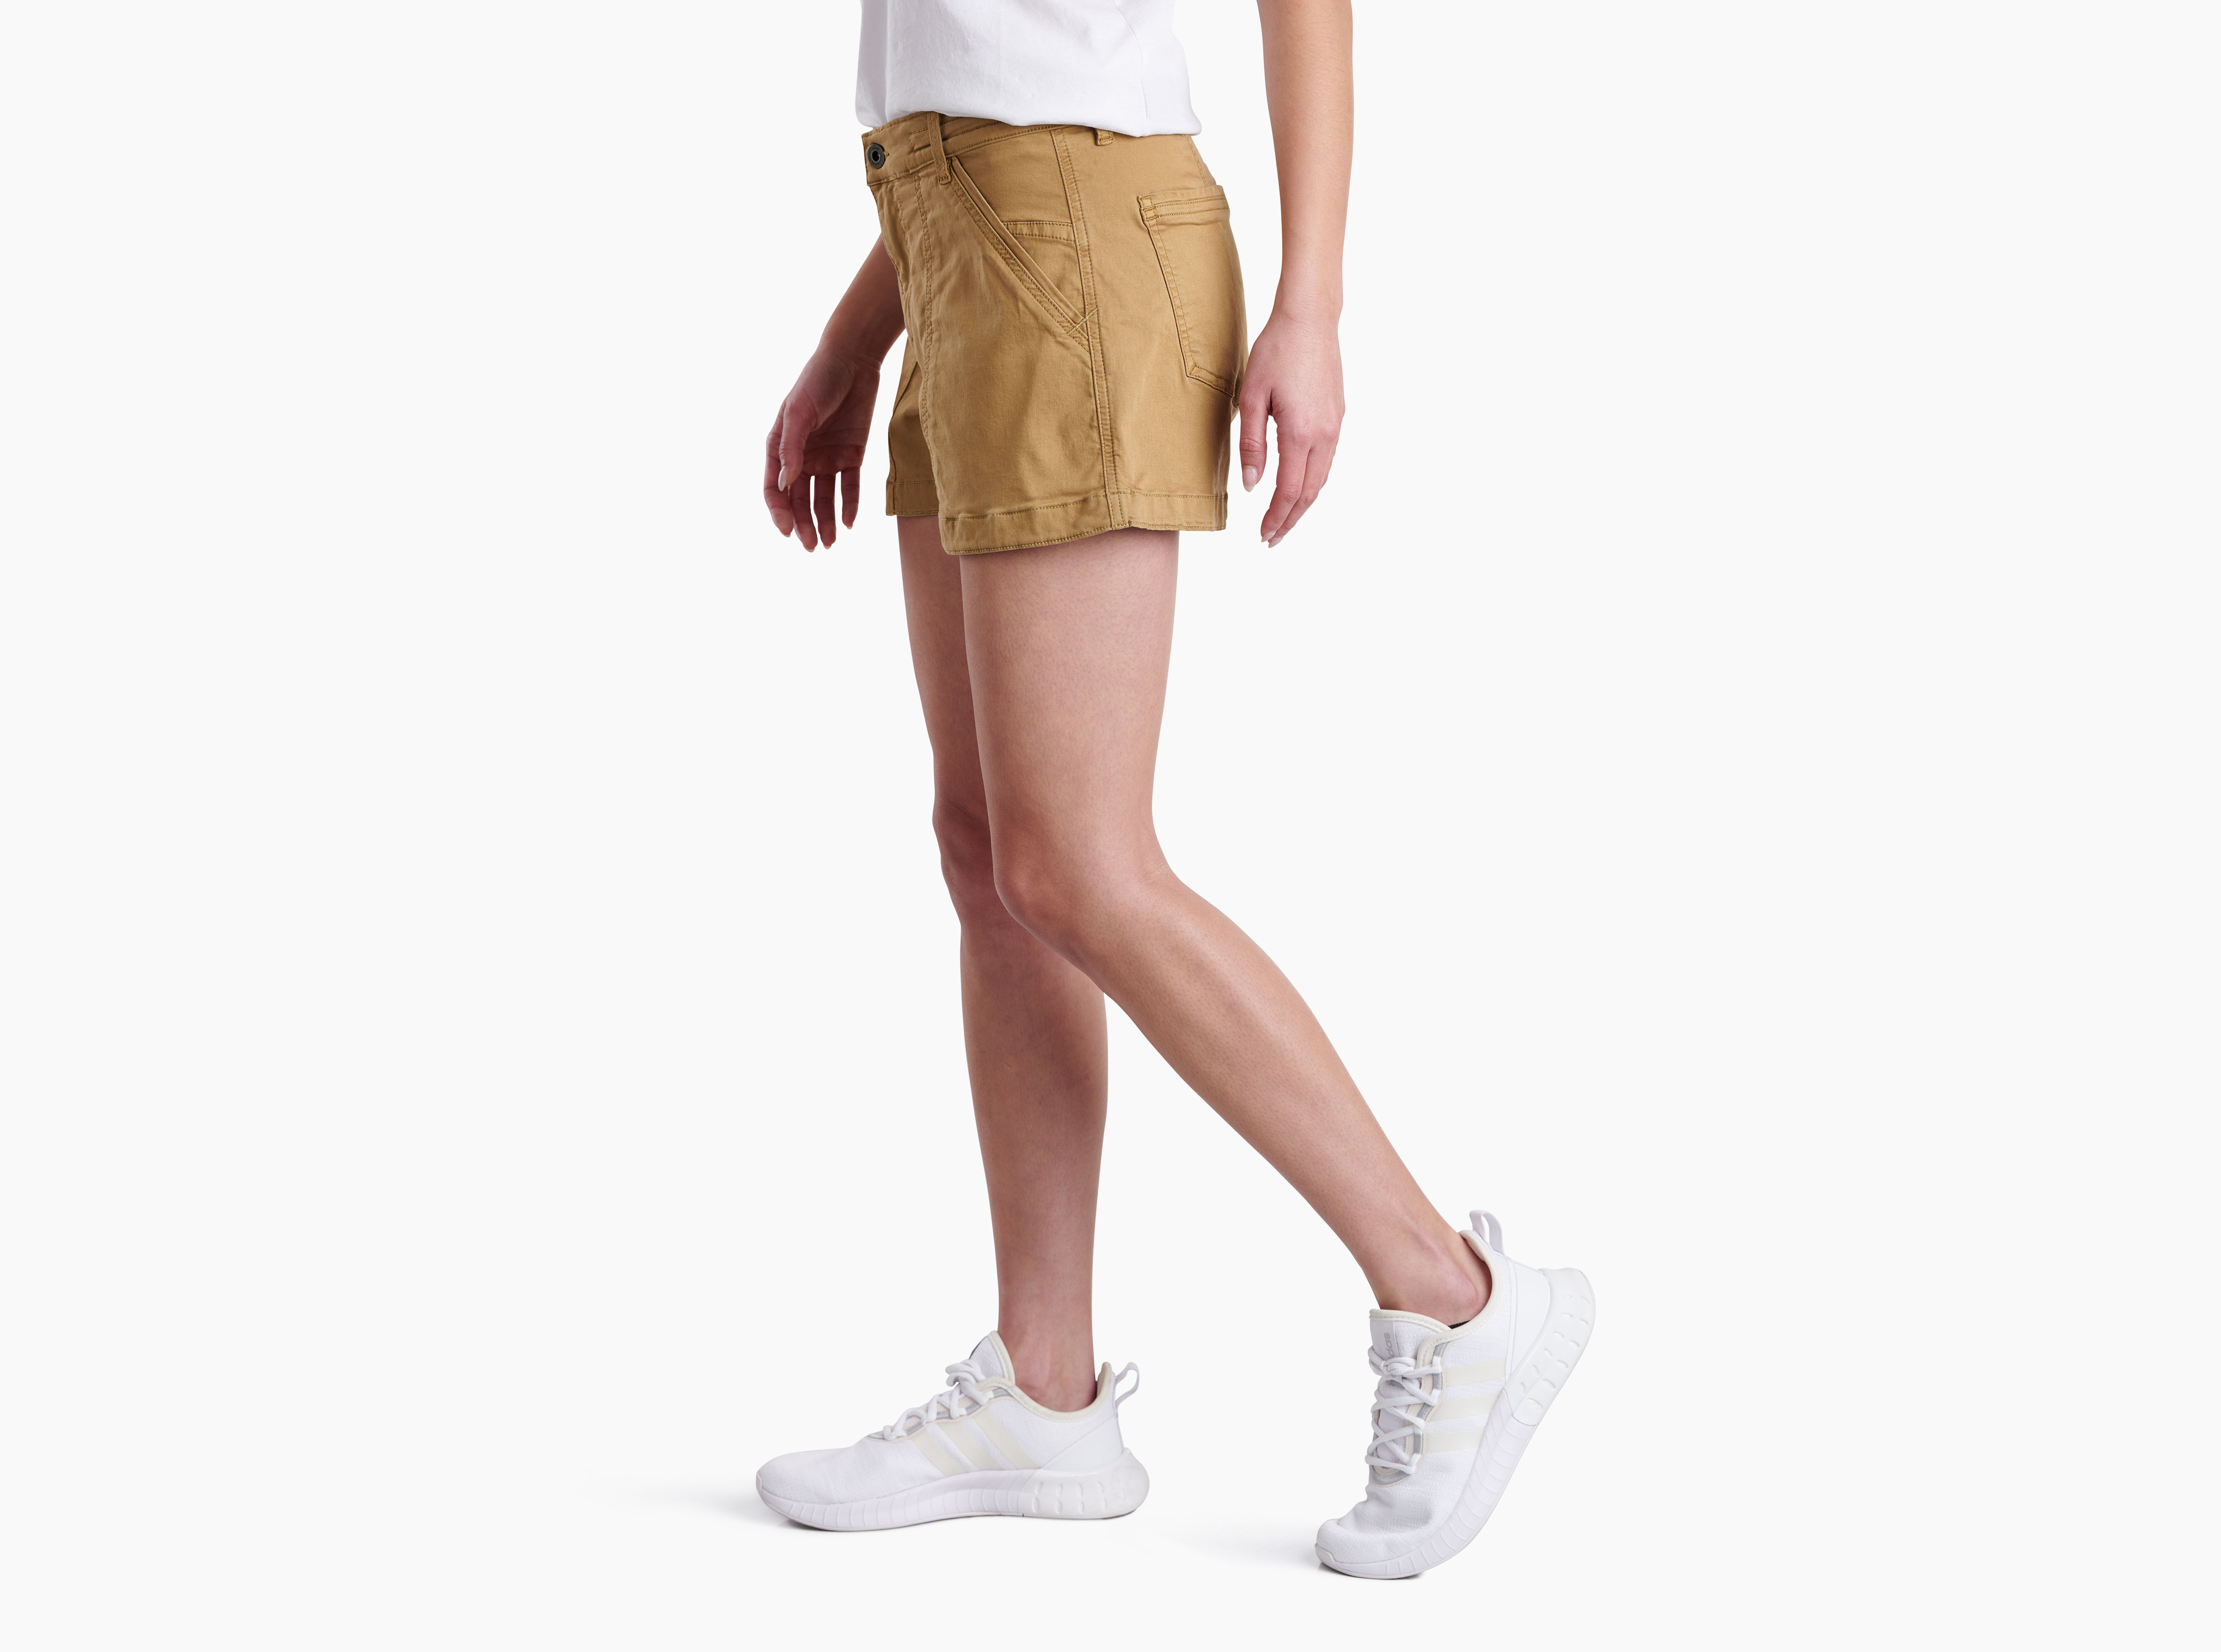 Kuhl Kultivatr Shorts, 4 Inseam - Womens, FREE SHIPPING in Canada